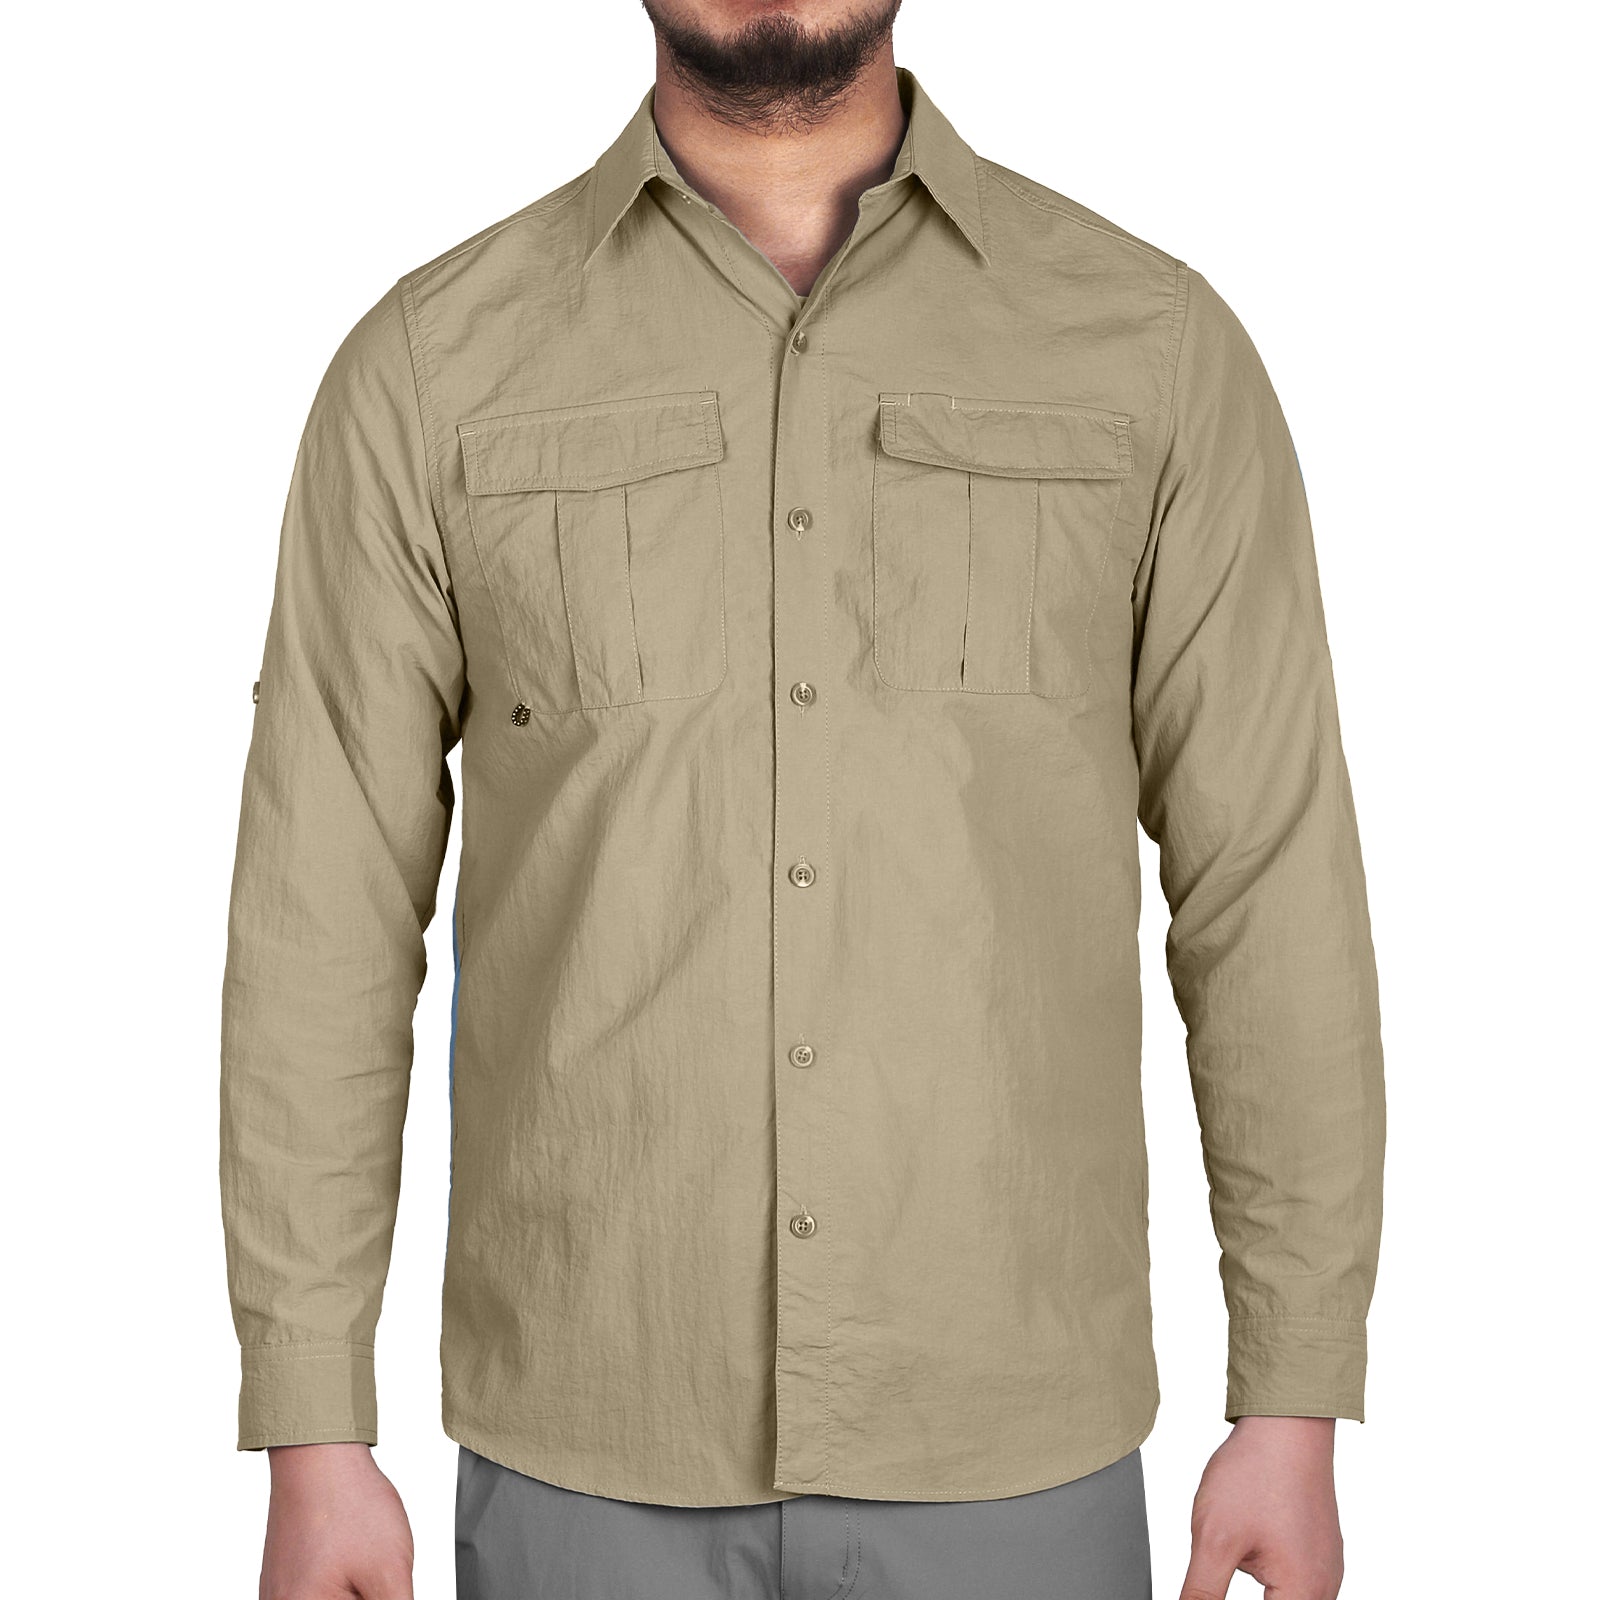 Men's Tactical Shirts Quick Dry UV Protection Breathable Long Sleeve Hiking Fishing Shirts, Army-Green / S